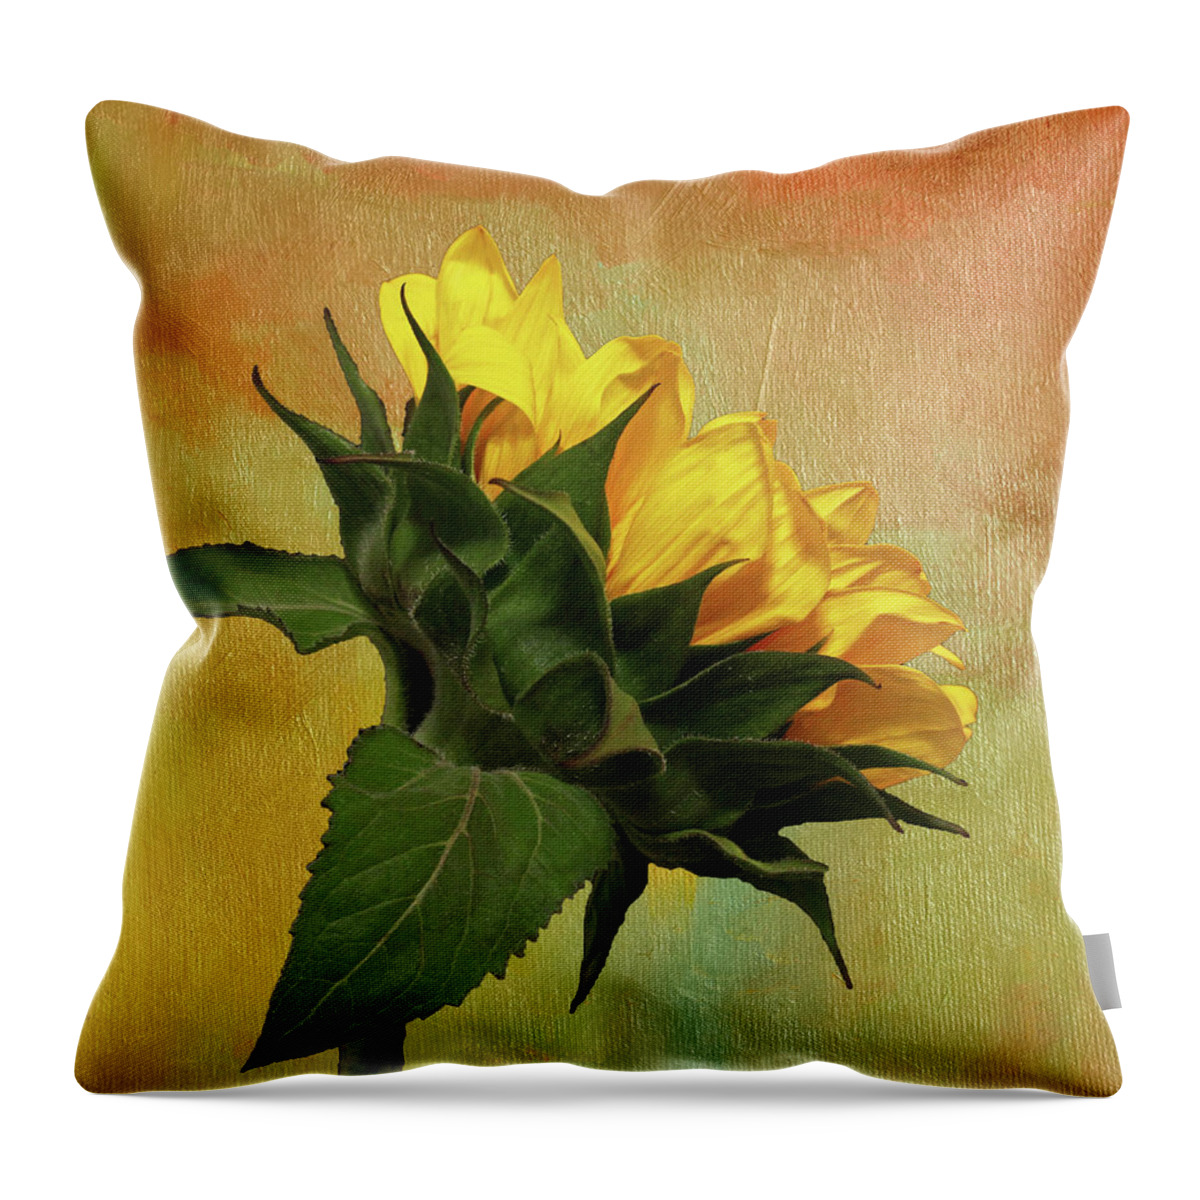 Sunflower Throw Pillow featuring the photograph Painted Golden Beauty by Judy Vincent